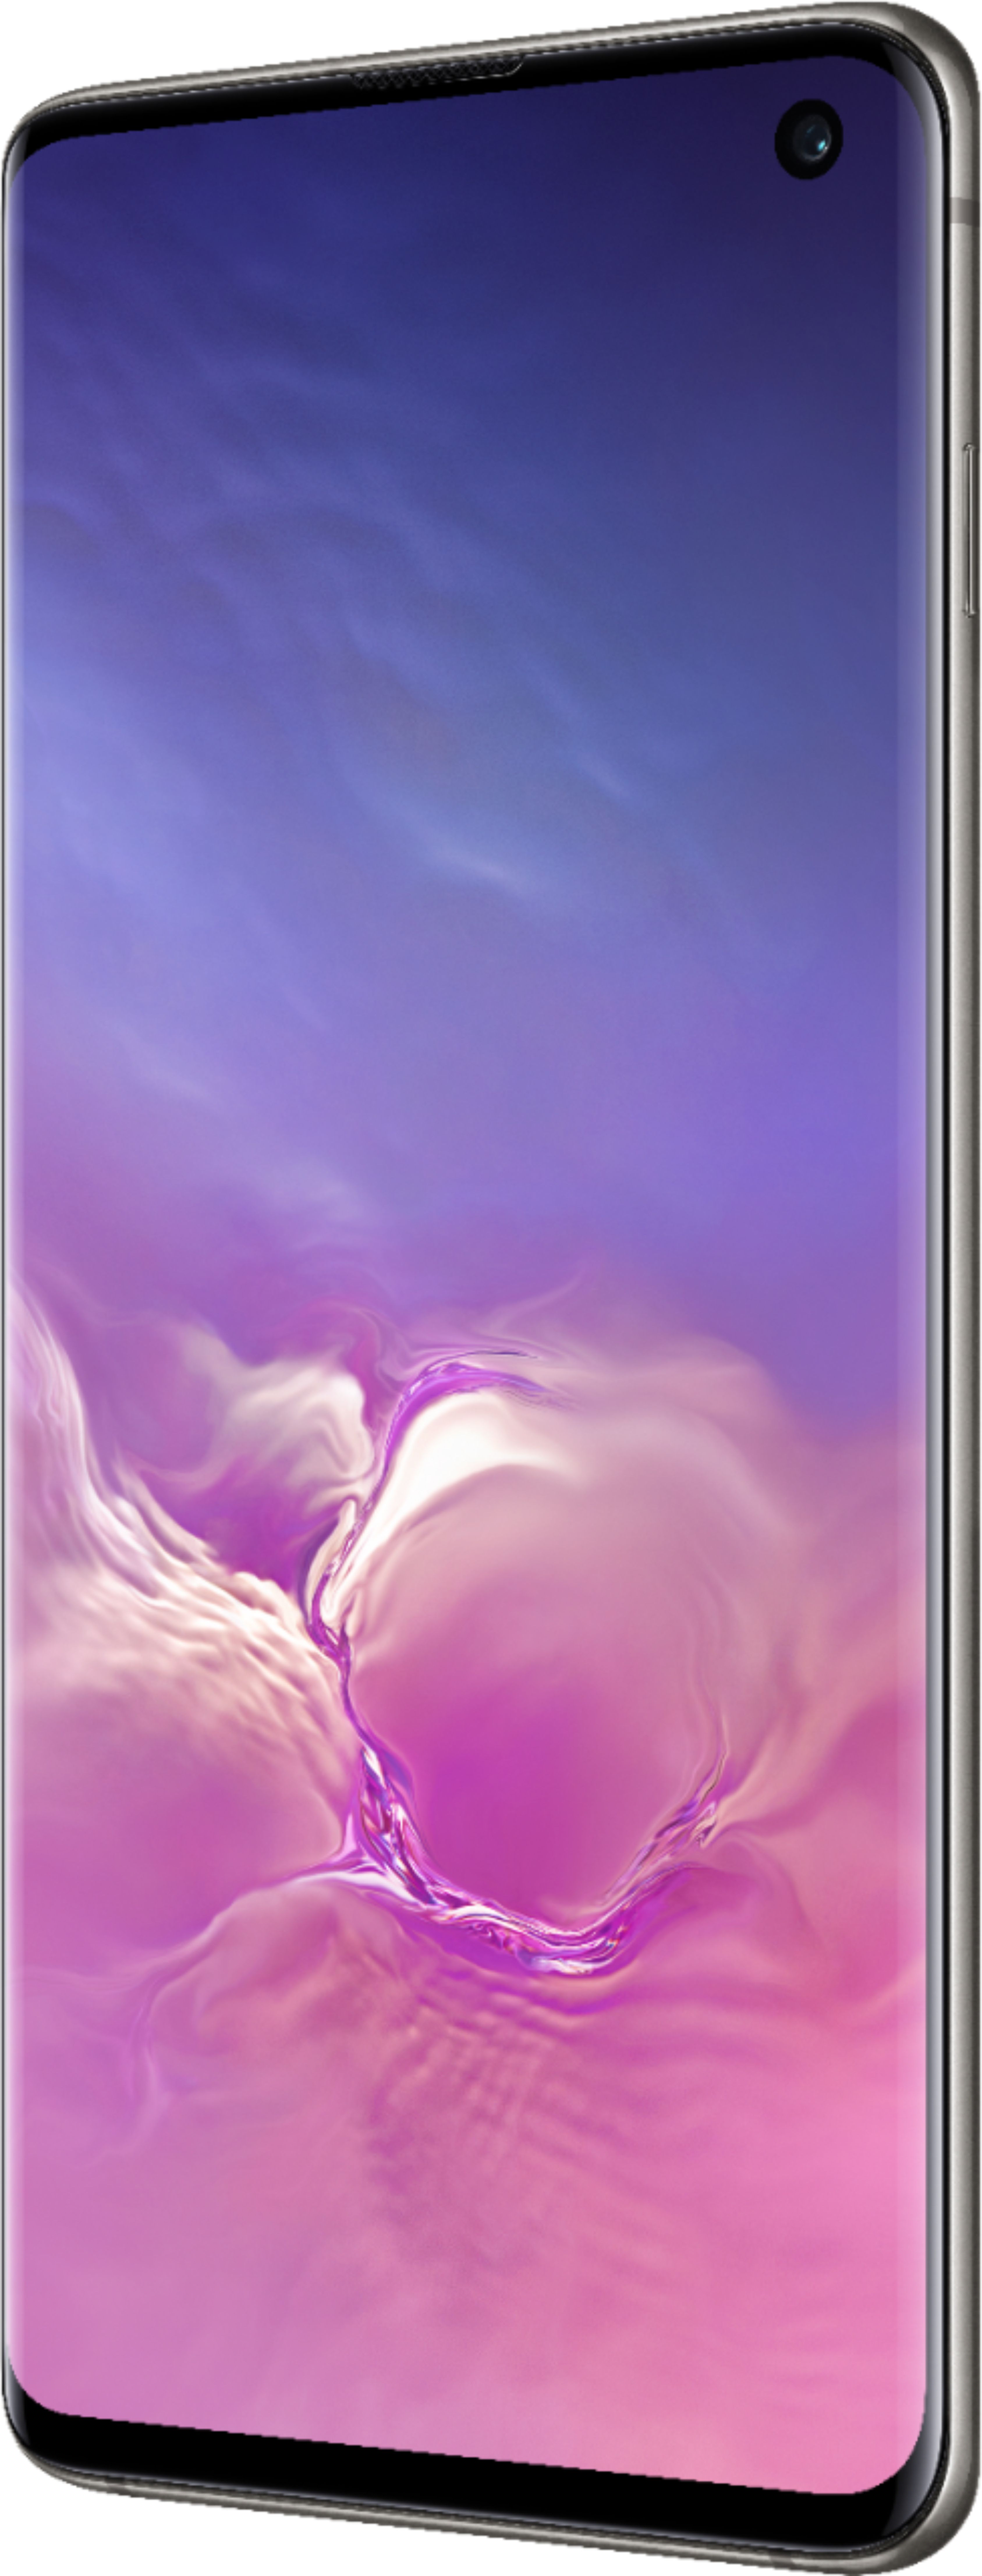 Best Buy: Samsung Galaxy S10 with 128GB Memory Cell Phone ...